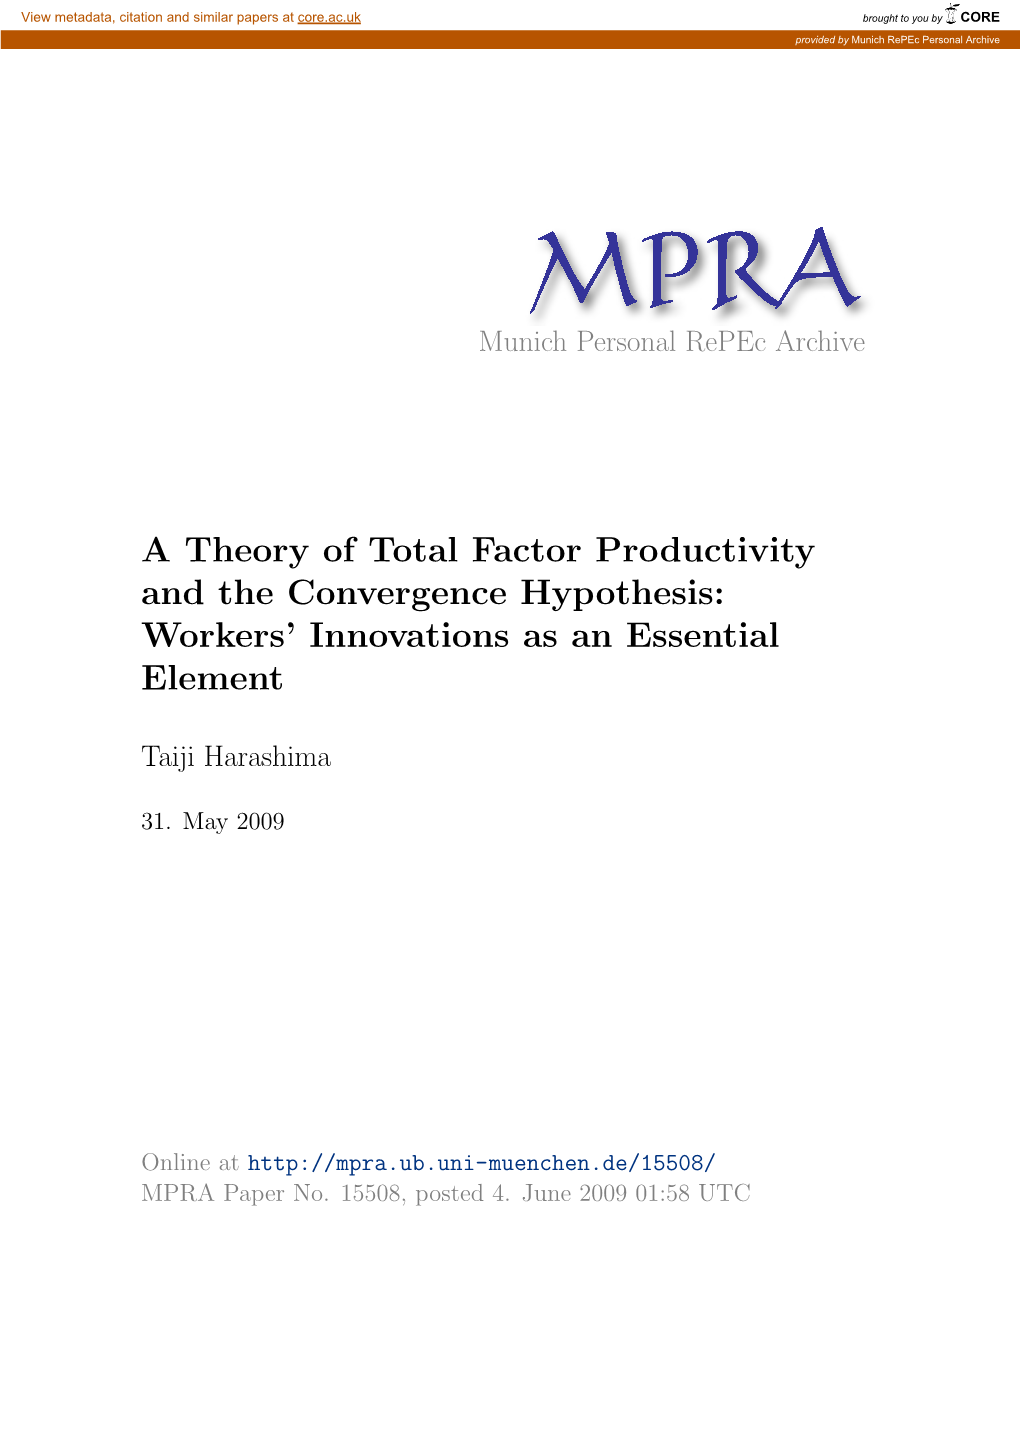 A Theory of Total Factor Productivity and the Convergence Hypothesis: Workers’ Innovations As an Essential Element